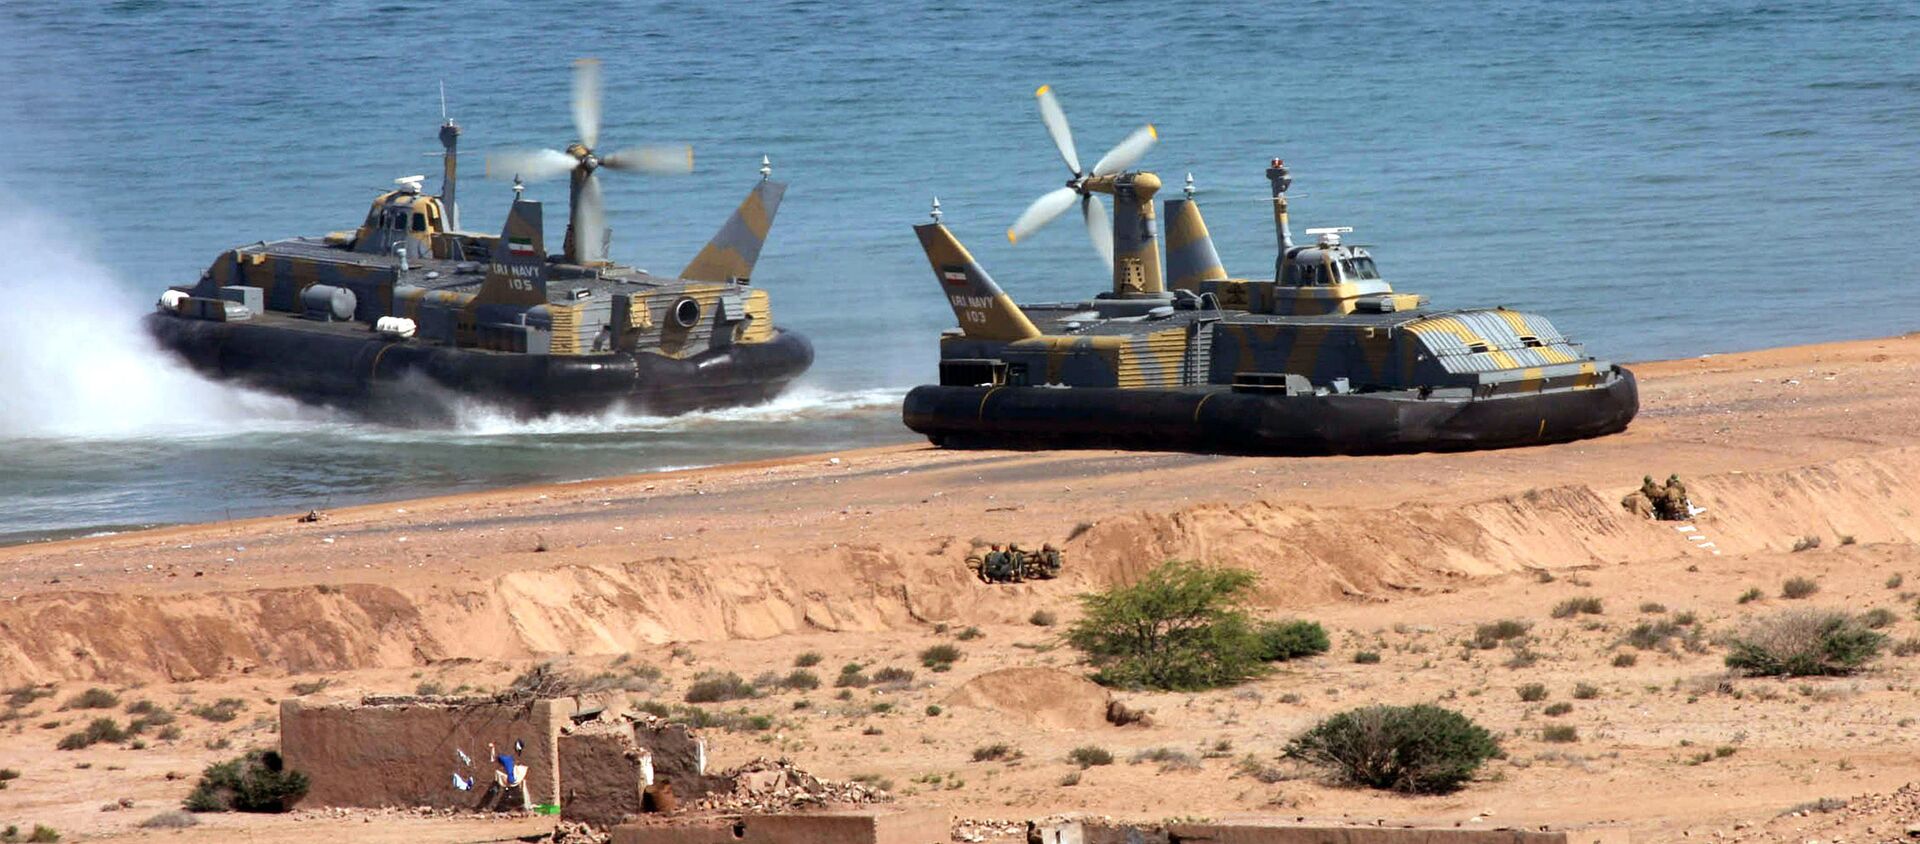 Two hovercraft of Iran's elite Revolutionary Guard come ashore, as they take part in manoeuvres in the Gulf and Sea of Oman, Wednesday, 5 April 2006. The Revolutionary Guard, the elite branch of Iran's military, have been holding manoeuvres - code-named Great Prophet - since 31 March, touting what they call domestically built technological advances in their armed forces. (AP Photo/Mehr News, Sajjad Safari) - Sputnik International, 1920, 09.03.2021